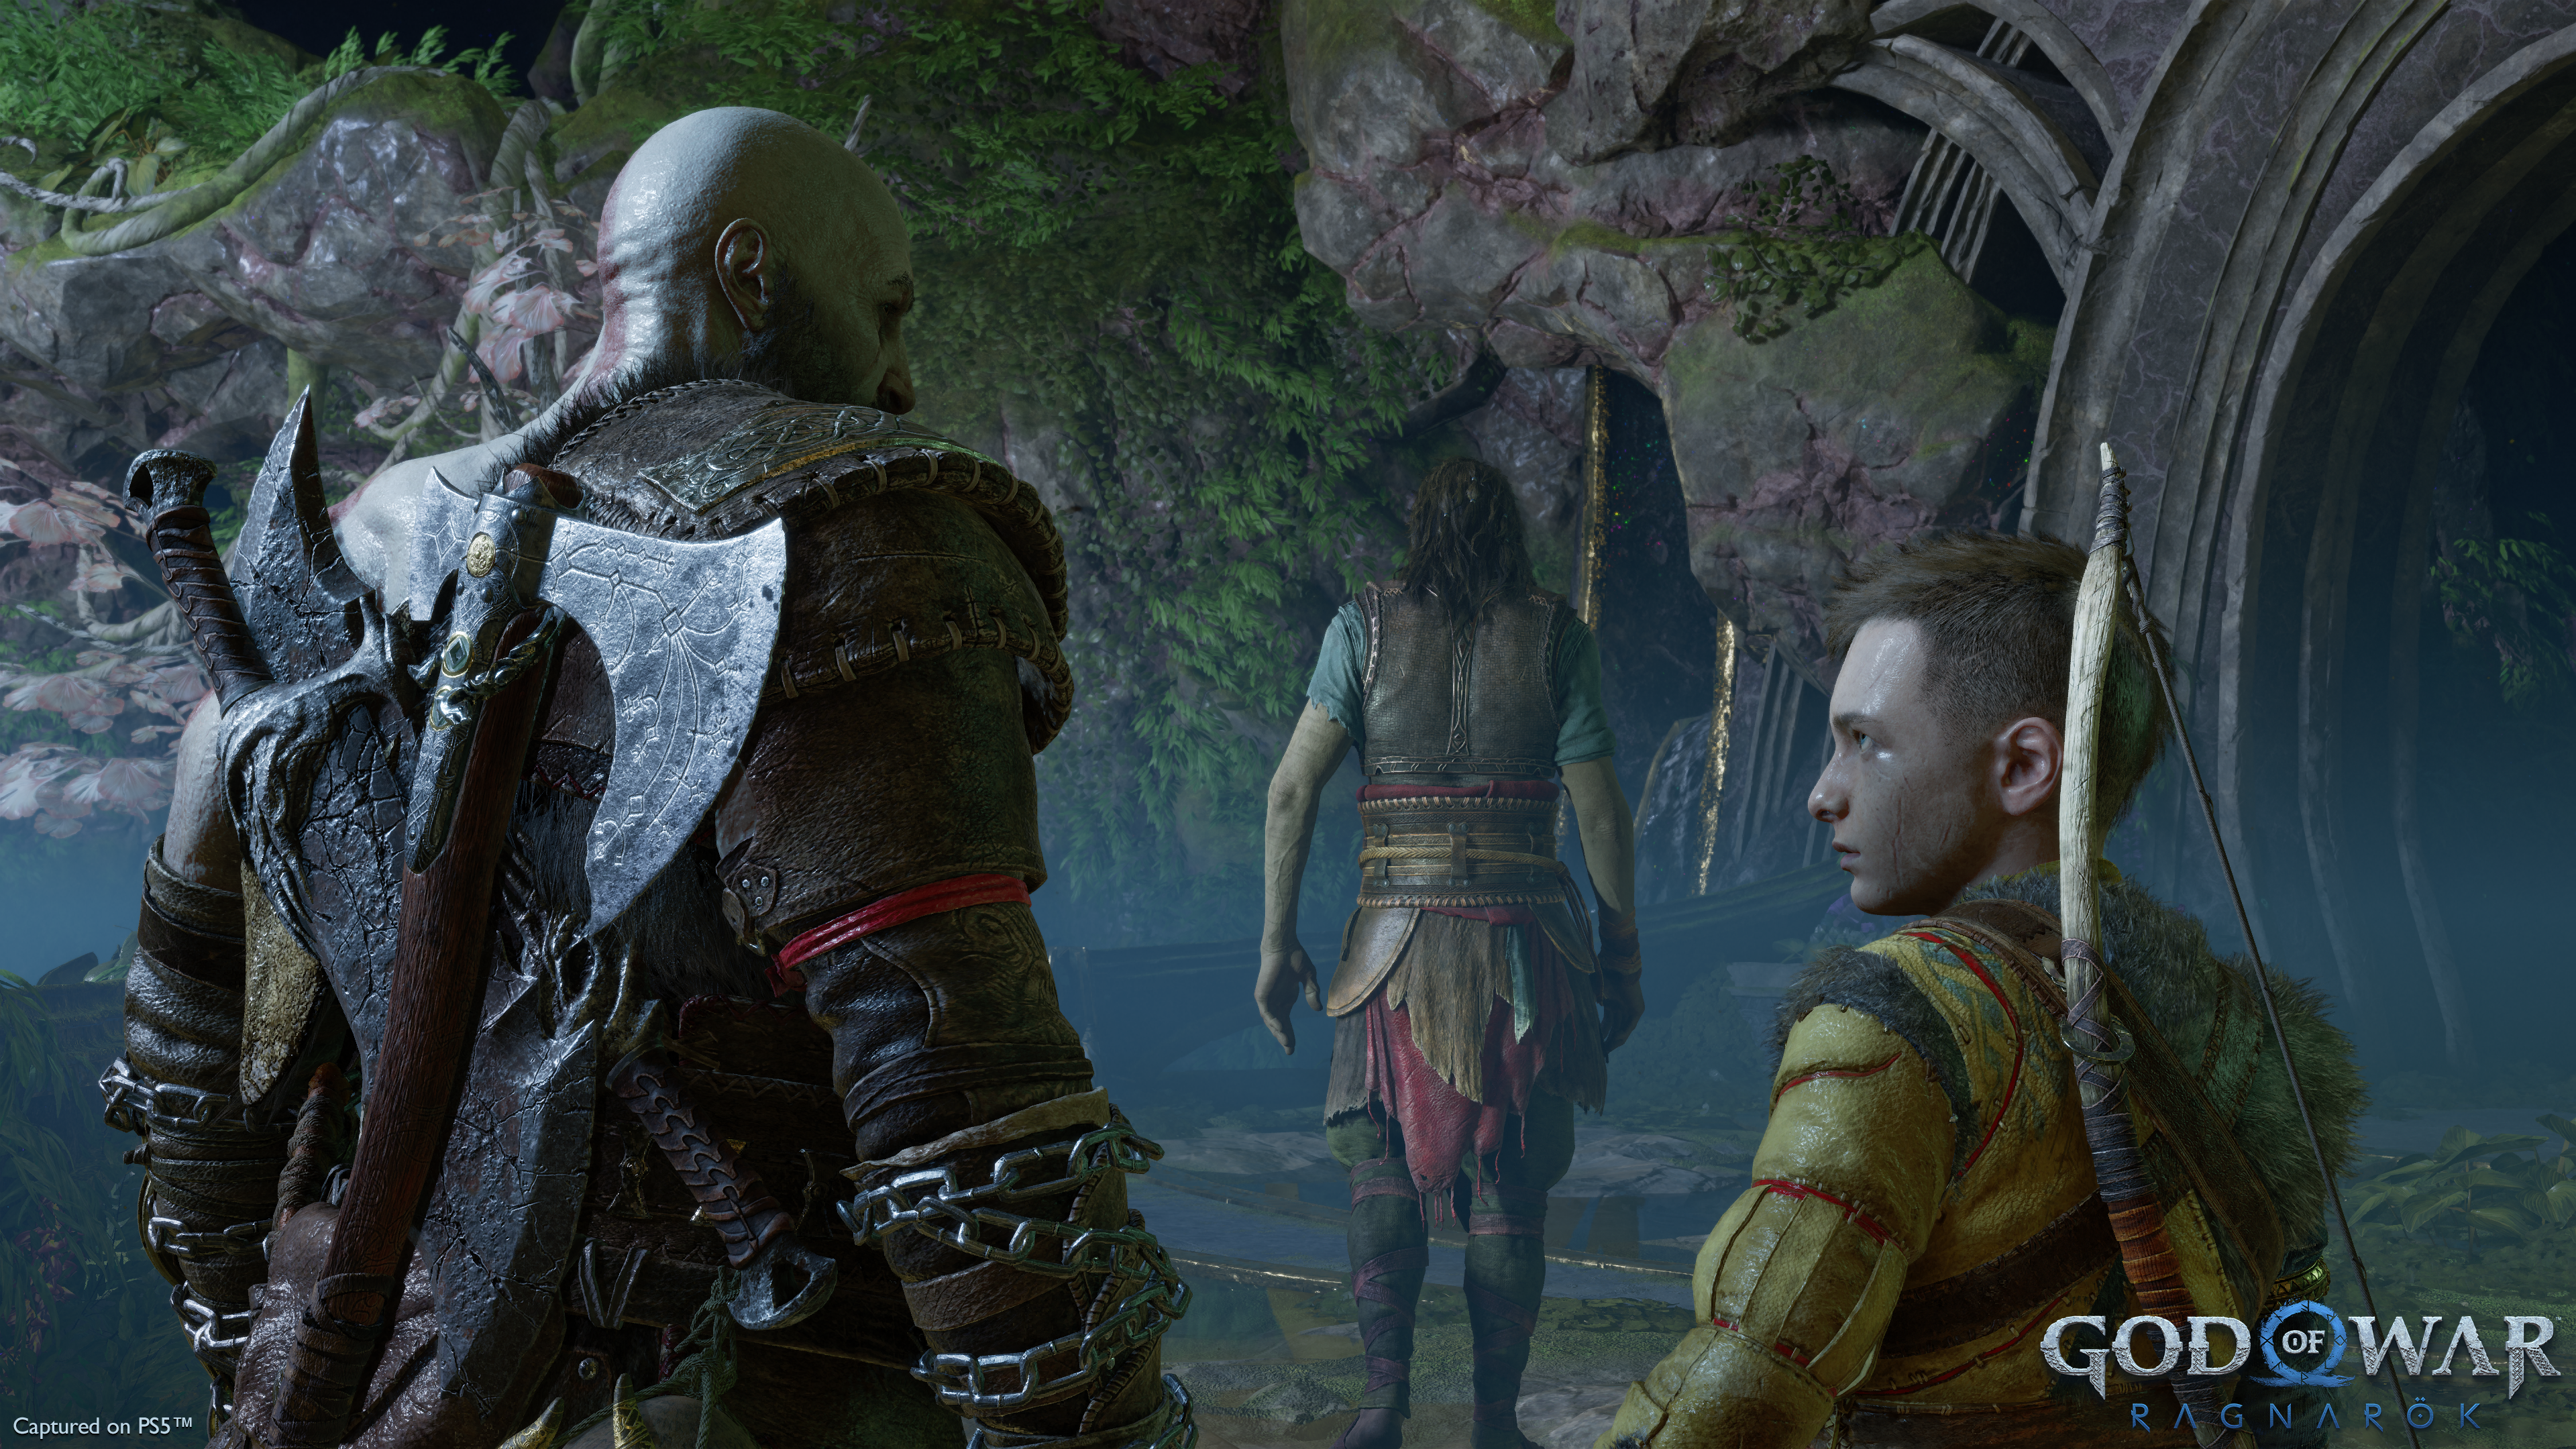 Kratos and Atreus share a look as they follow Tyr in God of War Ragnarok